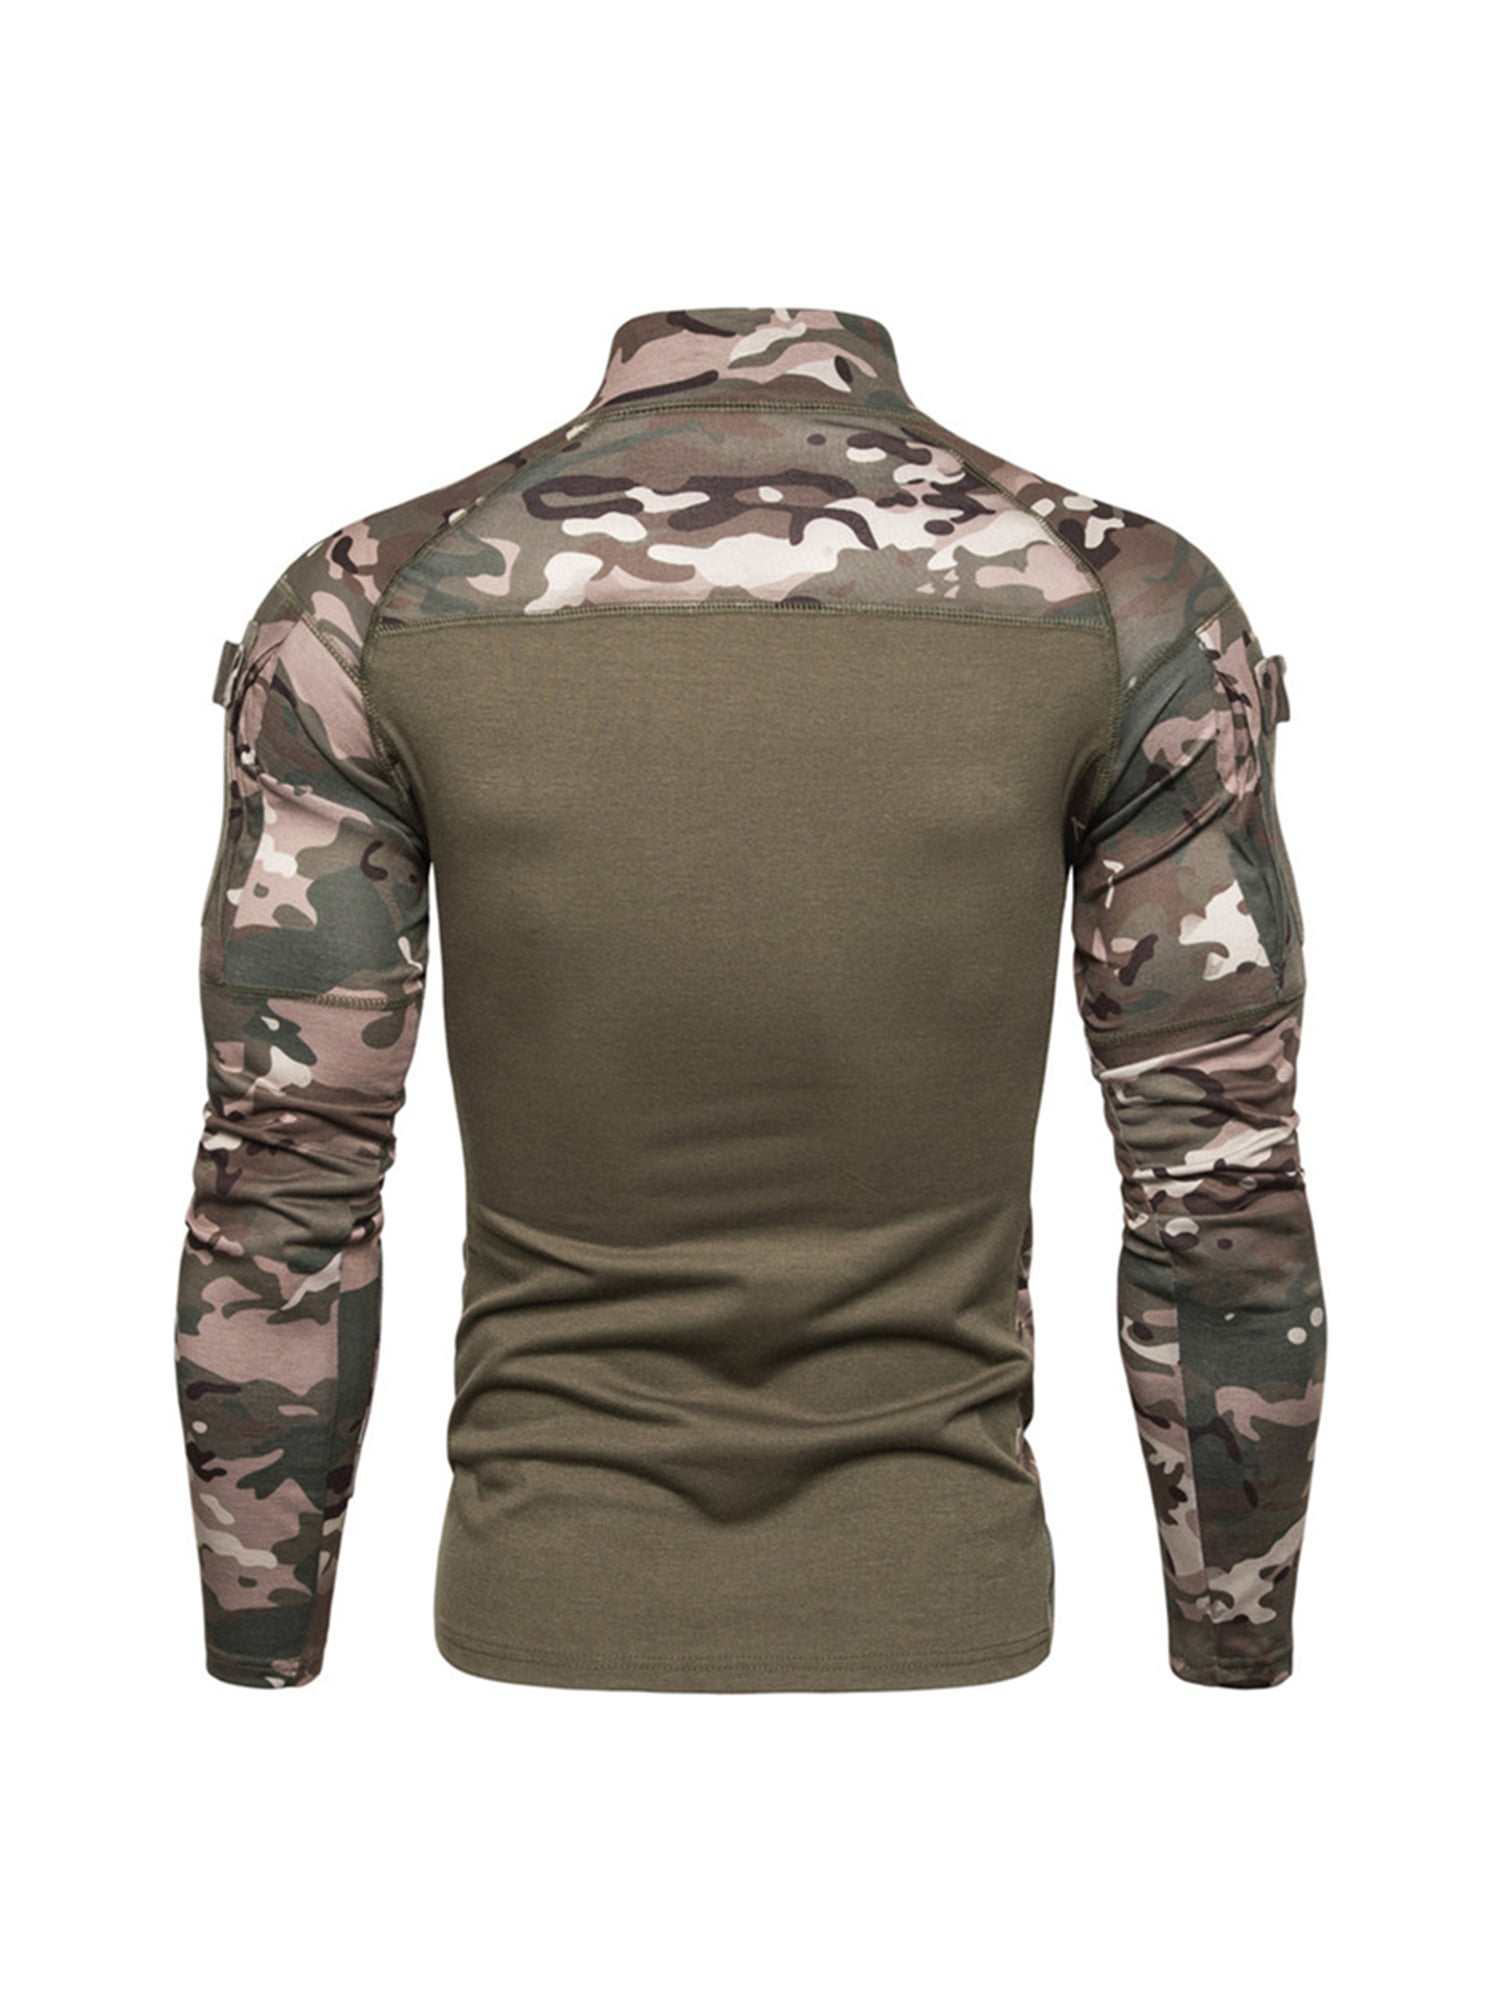 Men's Casual Short Sleeve Camouflage Camo Military T-Shirt Slim Army Combat Top 